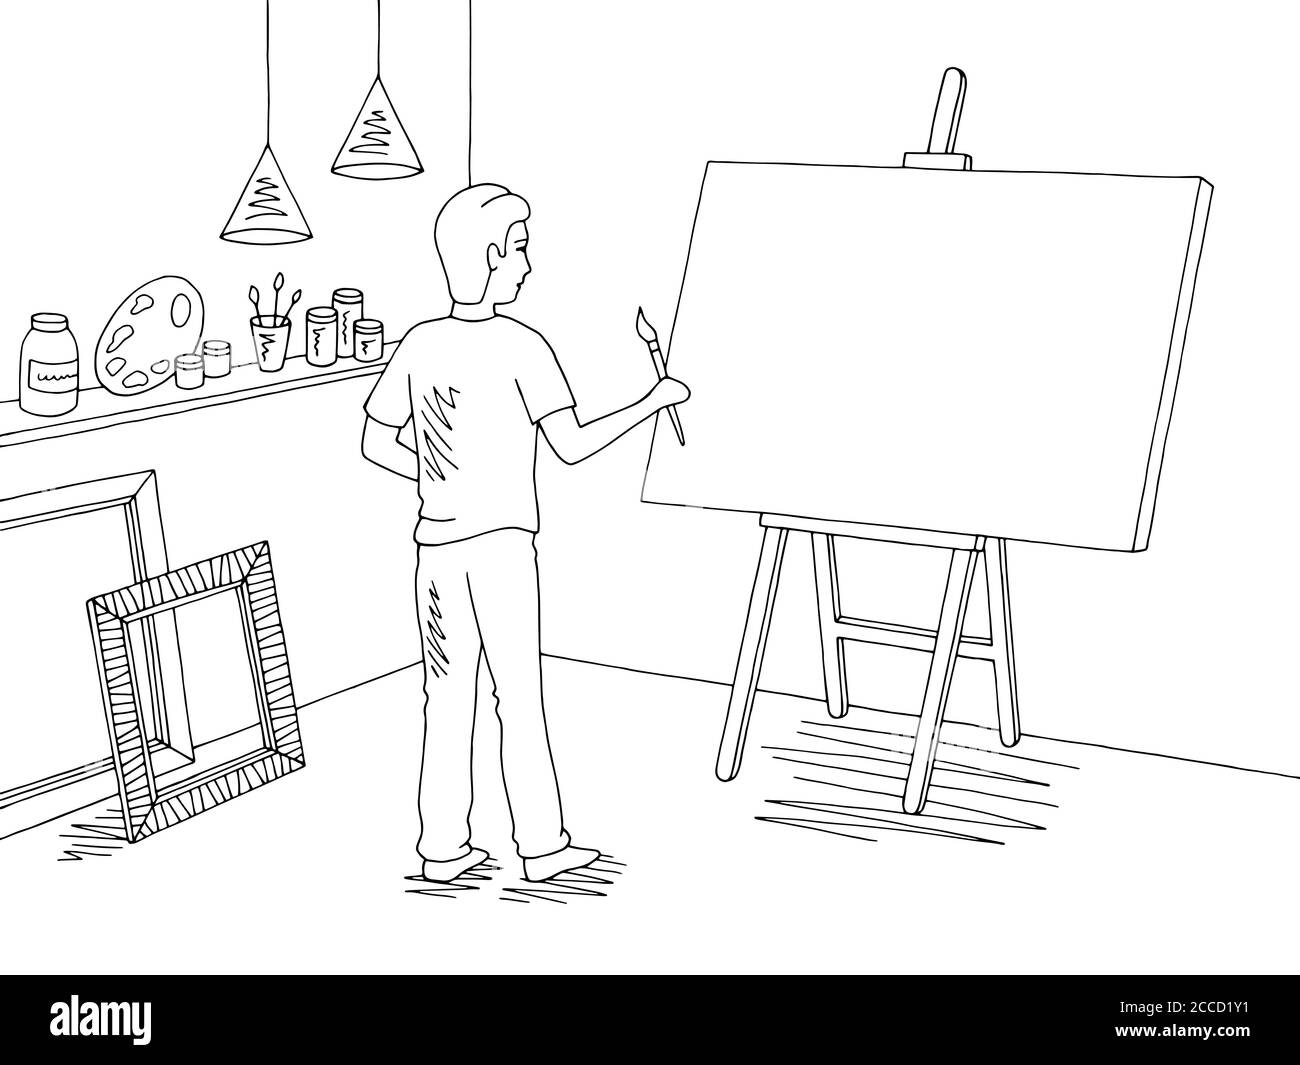 Boy painting a picture art workshop graphic black white interior sketch illustration vector Stock Vector